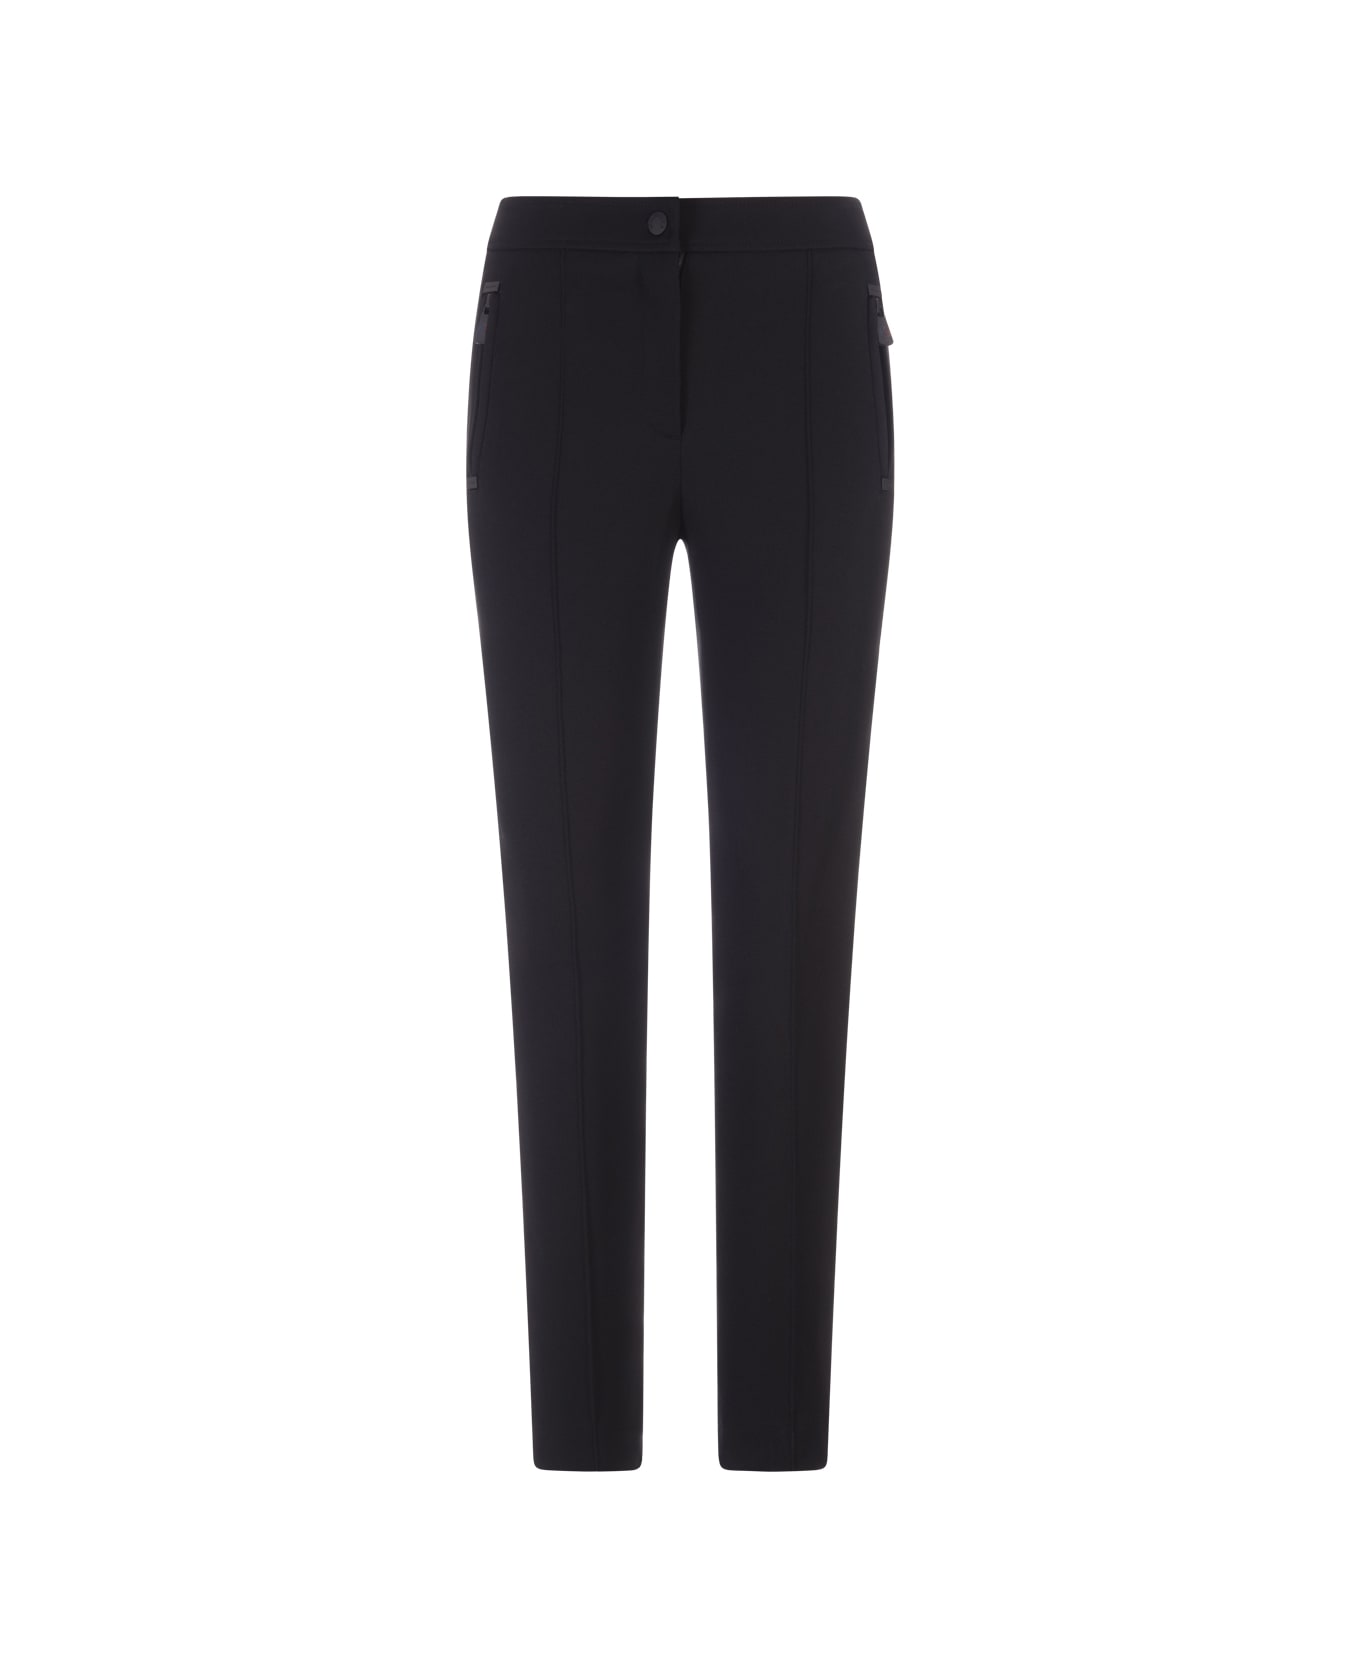 Moncler Woman Black Trousers In Technical Twill - Black